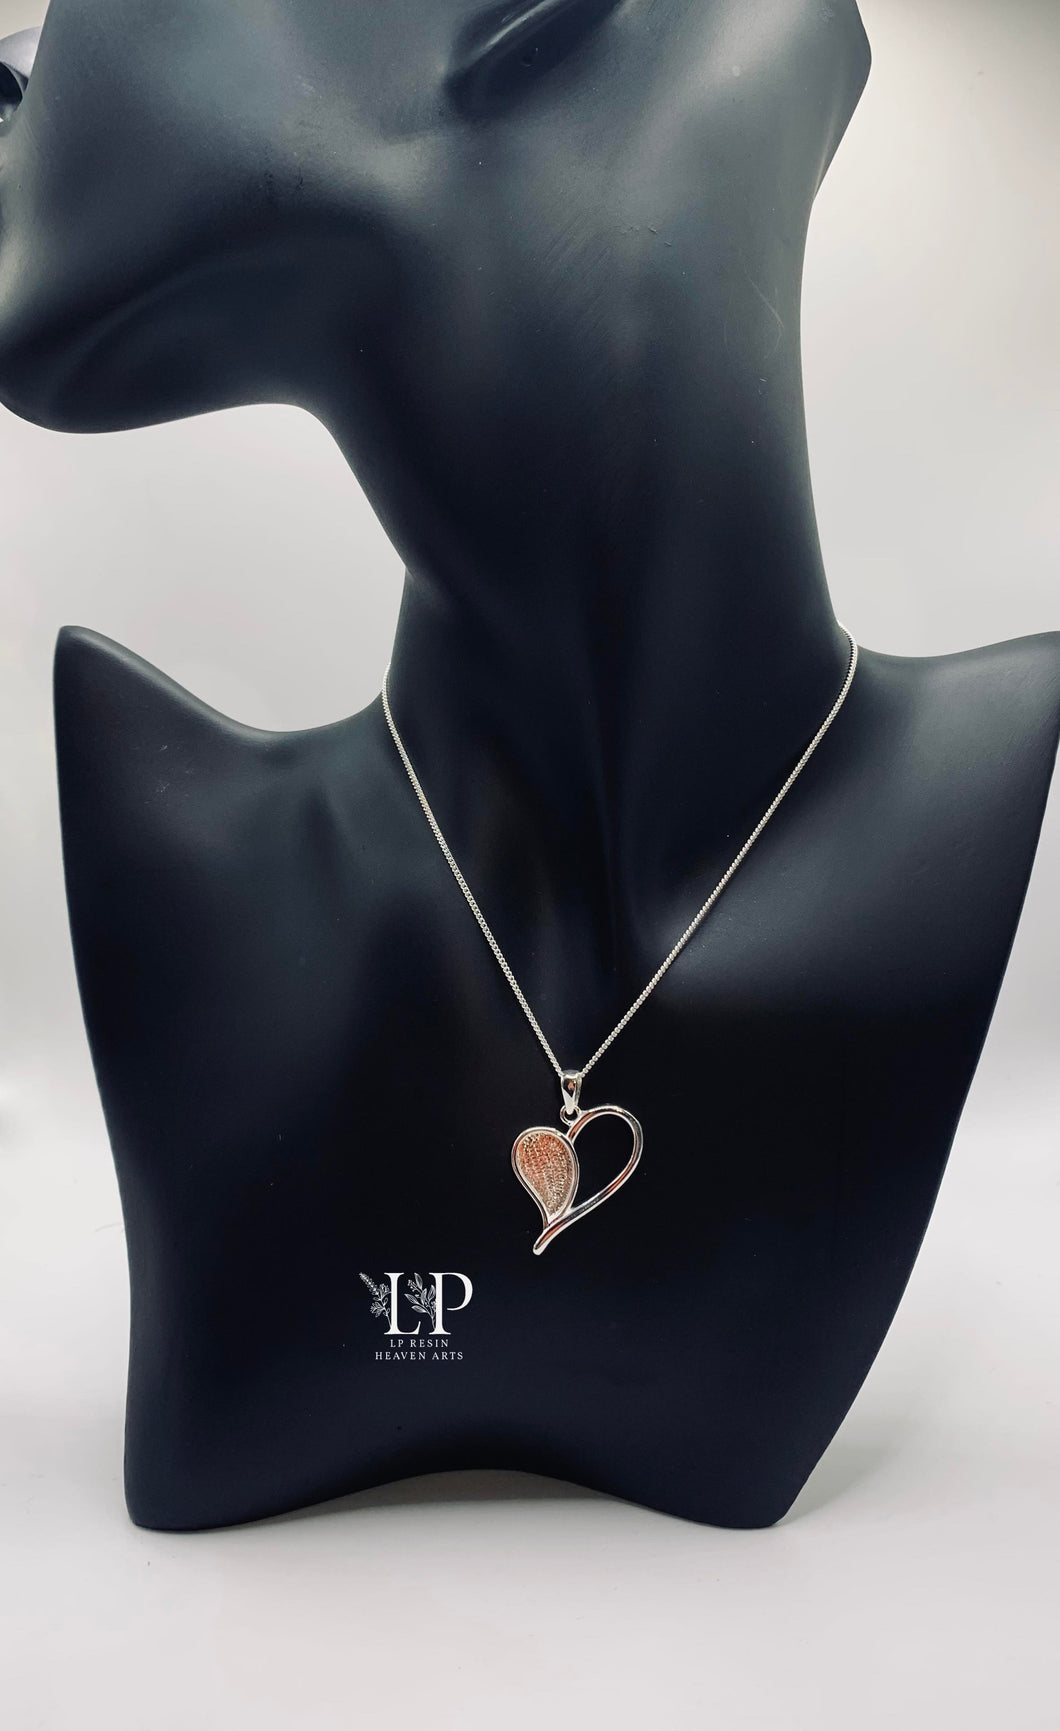 SPECIAL OFFER- Stunning open silver heart pendant in silver